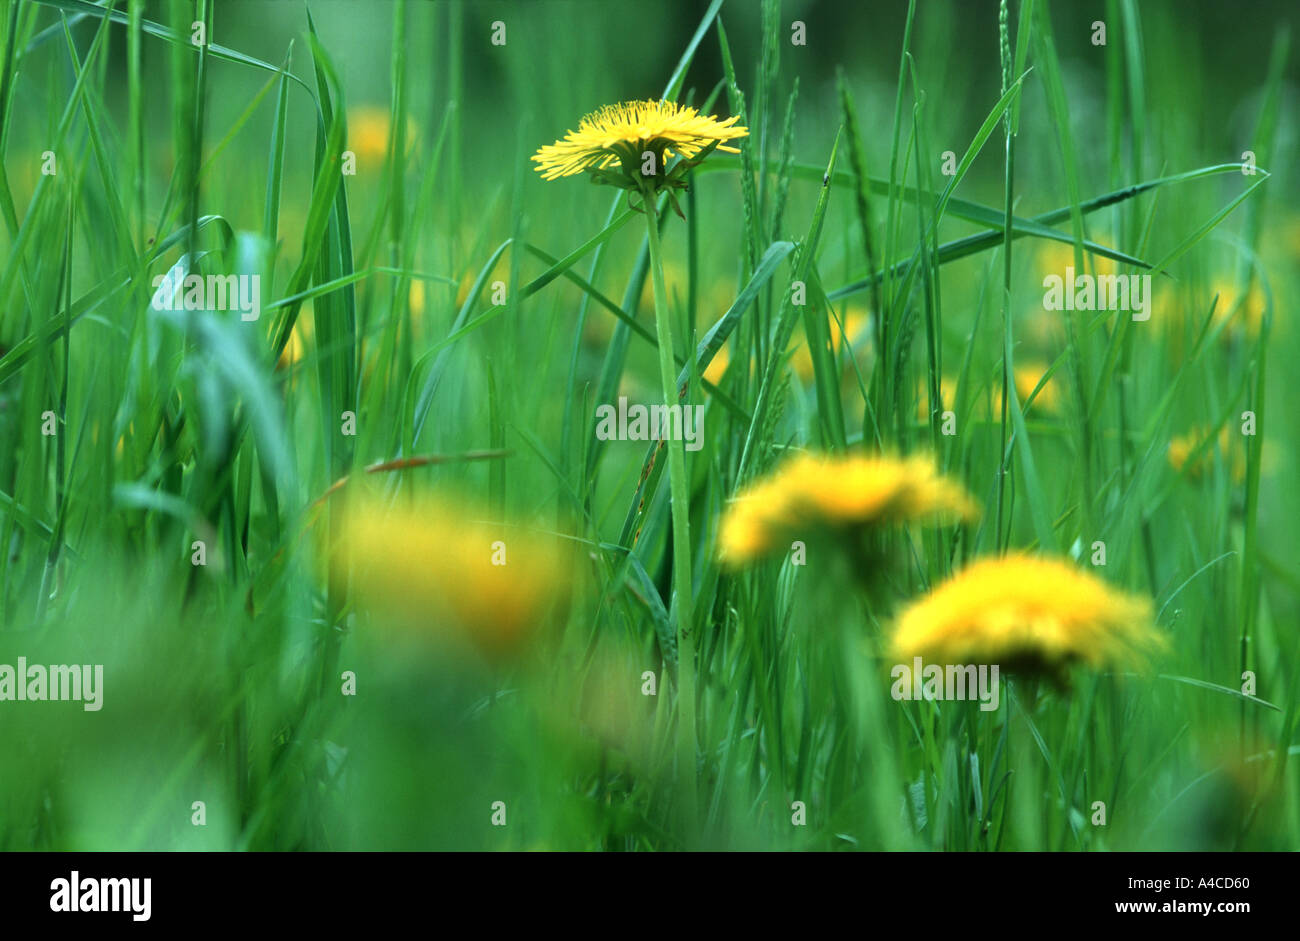 Meadow with Dandelions (Taraxacum officinale) Bodanrueck near Mindelsee Lake Constance (Bodensee) Stock Photo